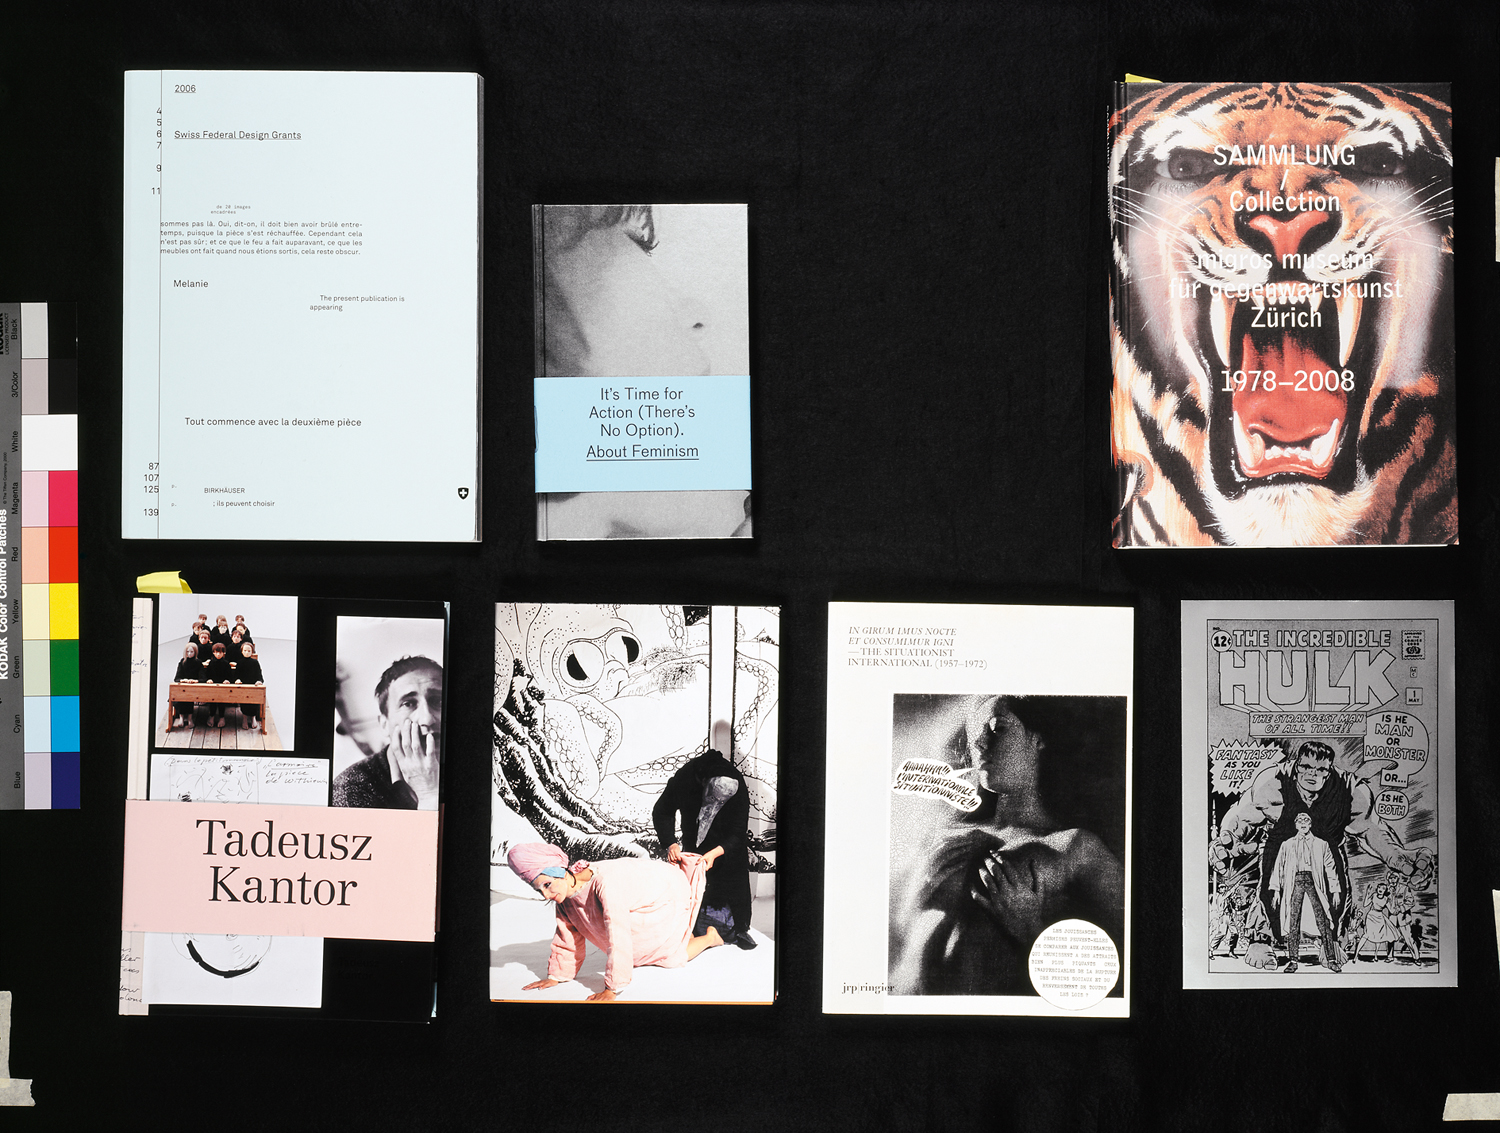 awarded publications (2001 - 2009): 'Bourses fédérales de design 2006' (2006), 'It's Time for Action (There's No Option). About Feminism' (2007), 'Tadeusz Kantor' (2009), 'Spartacus Chetwynd' (2007), 'SAMMLUNG/Collection migros museum für gegenwartskunst Zürich 1978 - 2008' (2008), 'The Situationist International 1957 - 1972' (2007), 'The Incredible Hulk' in: 'Spartacus Chetwynd' (2007)